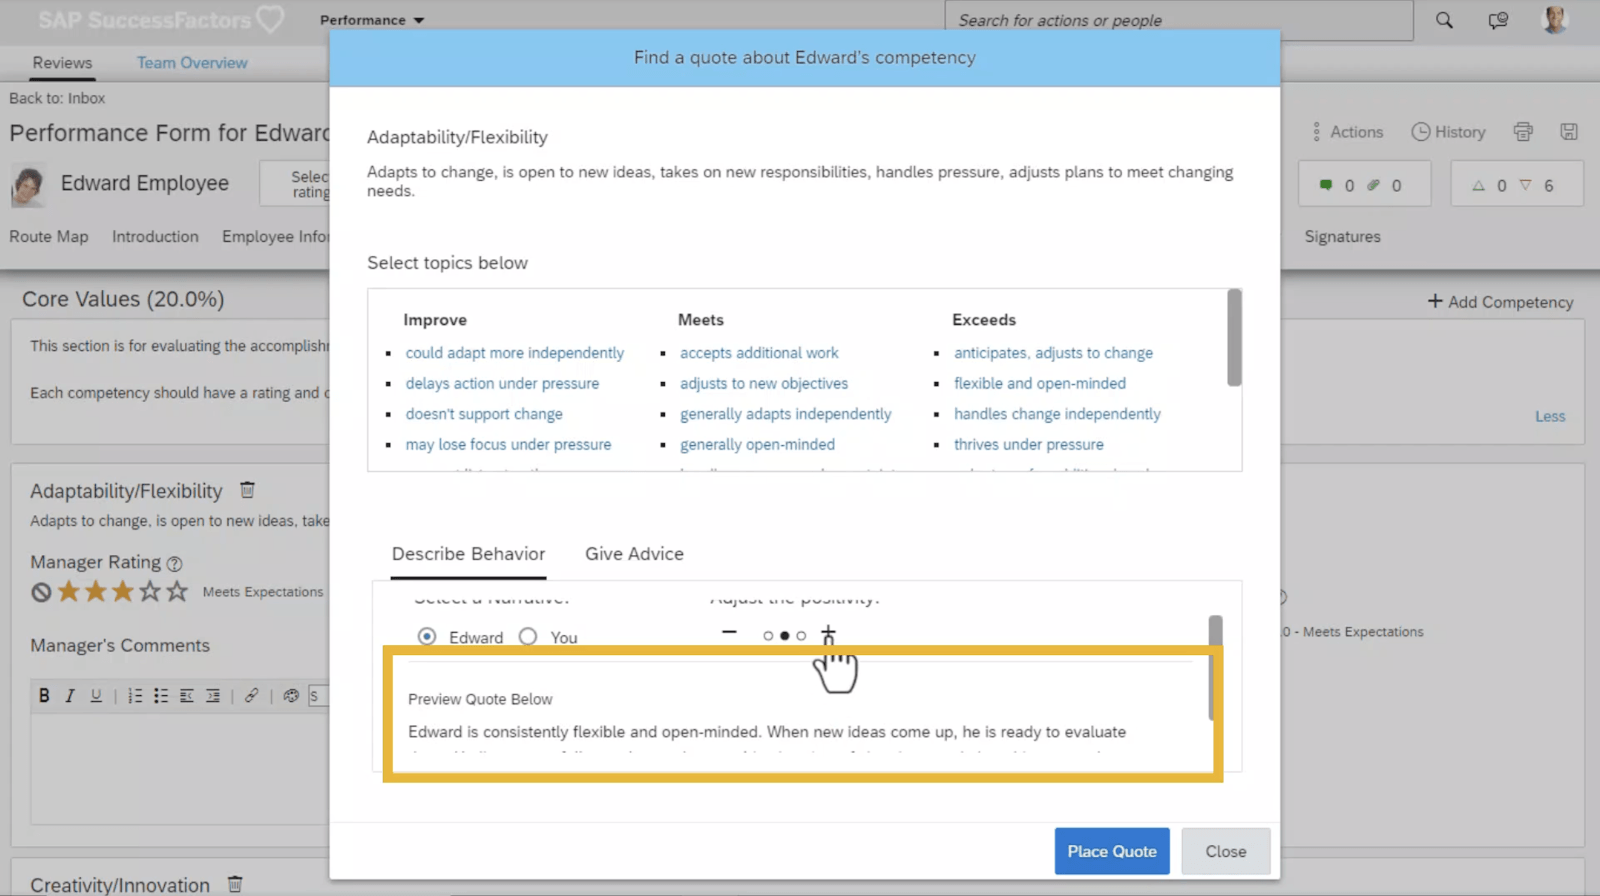 The SAP SuccessFactors platform displays suggestions for performance review quotes.